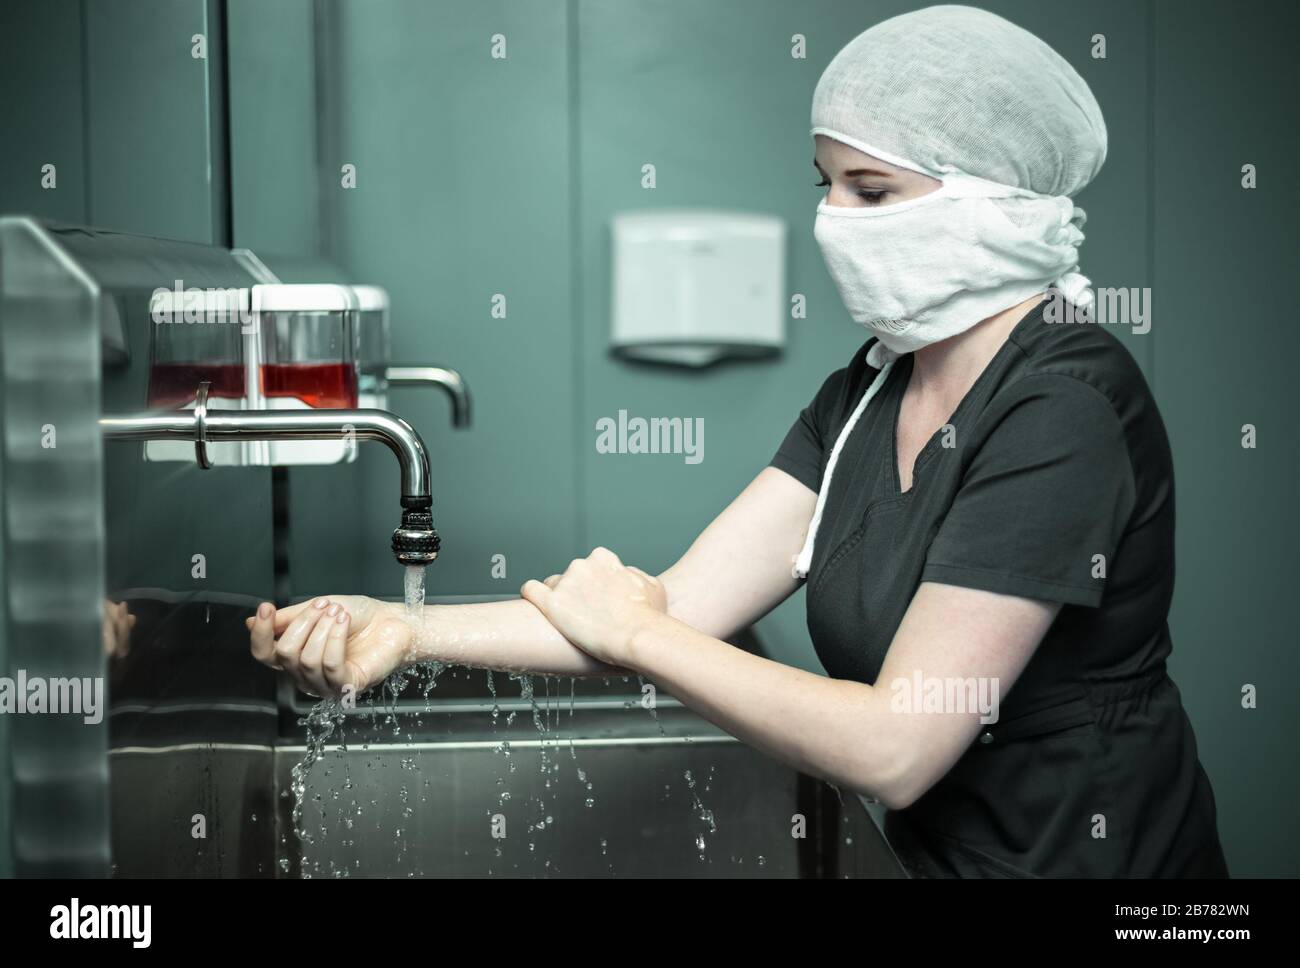 Nurse in protective medical mask washes hands Stock Photo